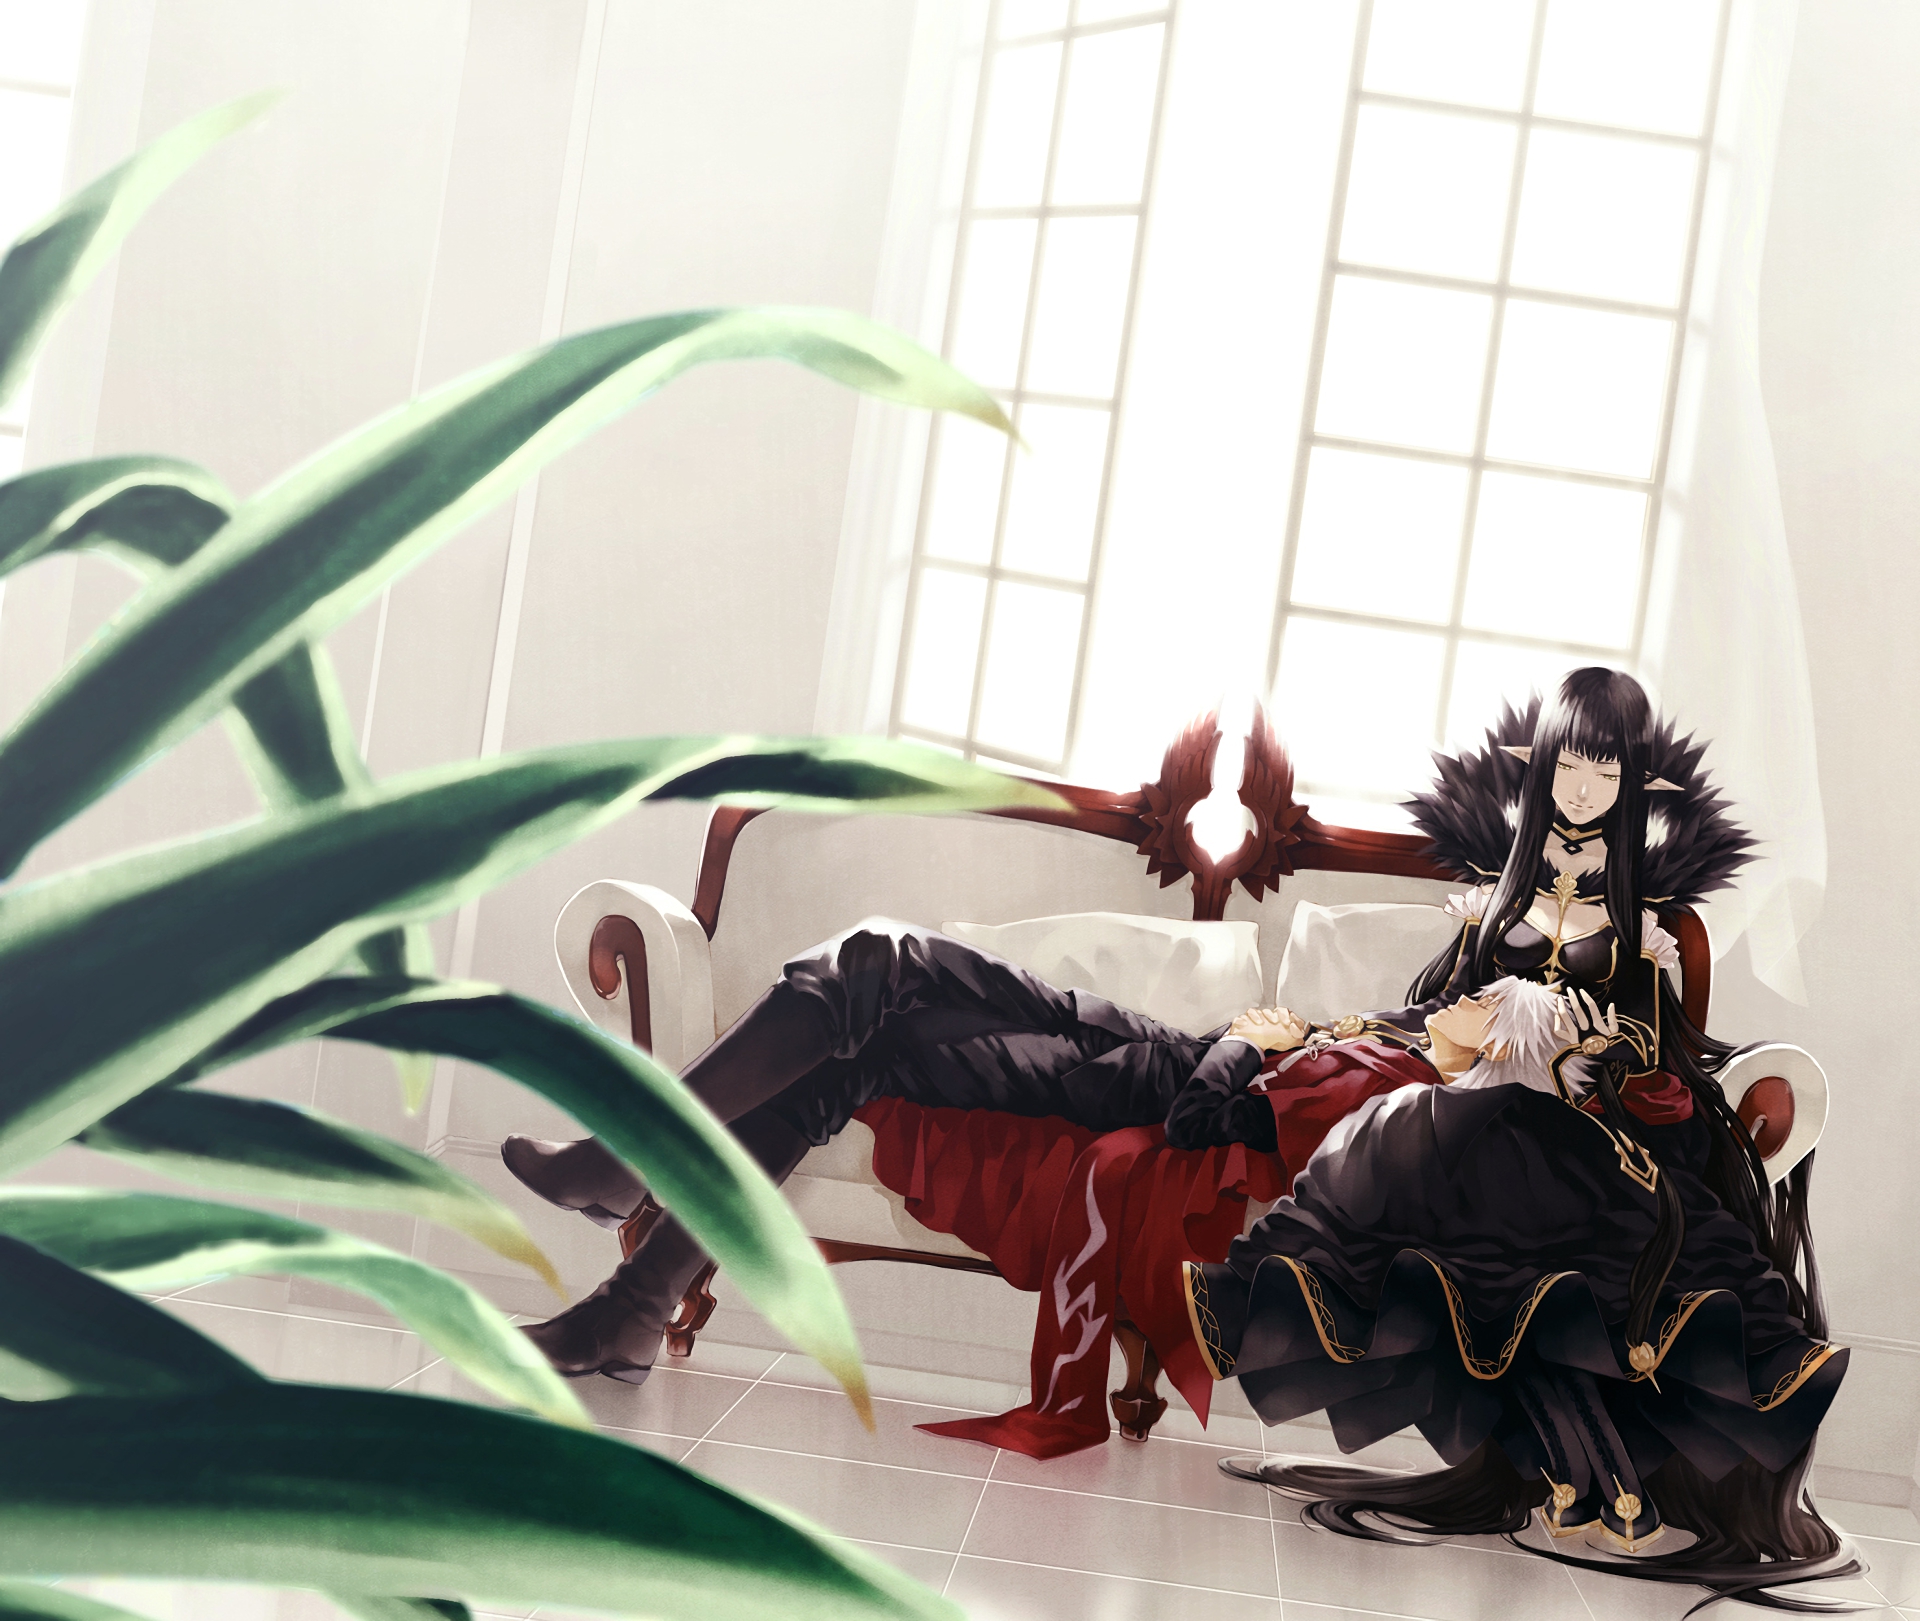 Anime 1920x1621 Fate/Apocrypha  Fate/Grand Order Fate series black dress couple big boobs no bra cleavage 2D black pants black boots anime girls anime boys bangs anime Shirou Kotomine Assassin of Red (Semiramis) (Fate/Apocrypha) yellow eyes fan art